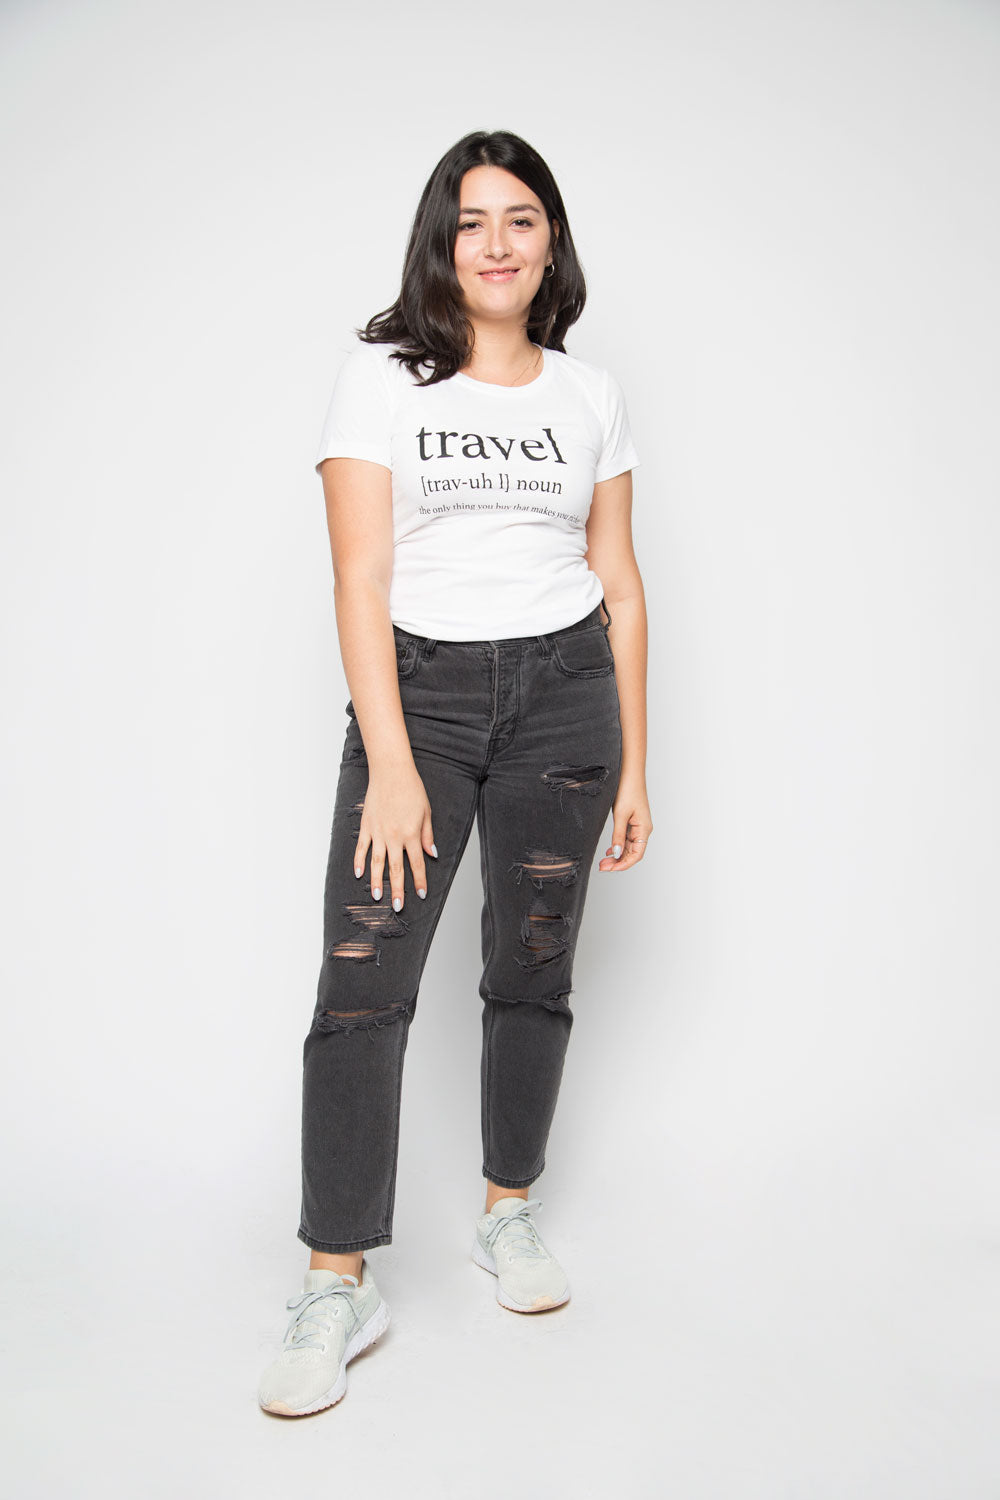 Travel Definition Shirt in White - Trunk Series